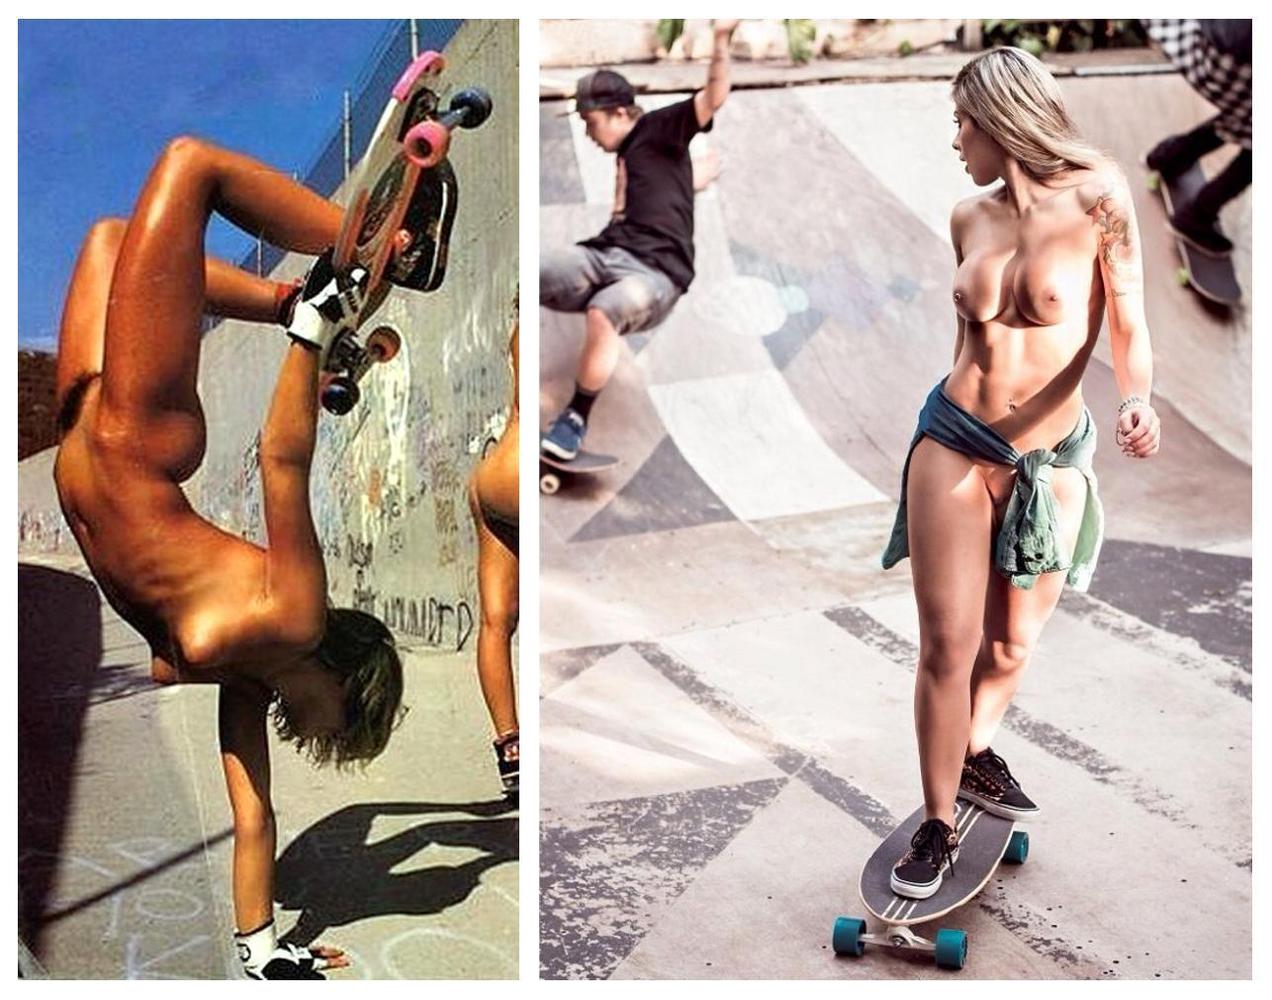 Nude skateboarders : Nude skateboarding - Best adult videos and photos.